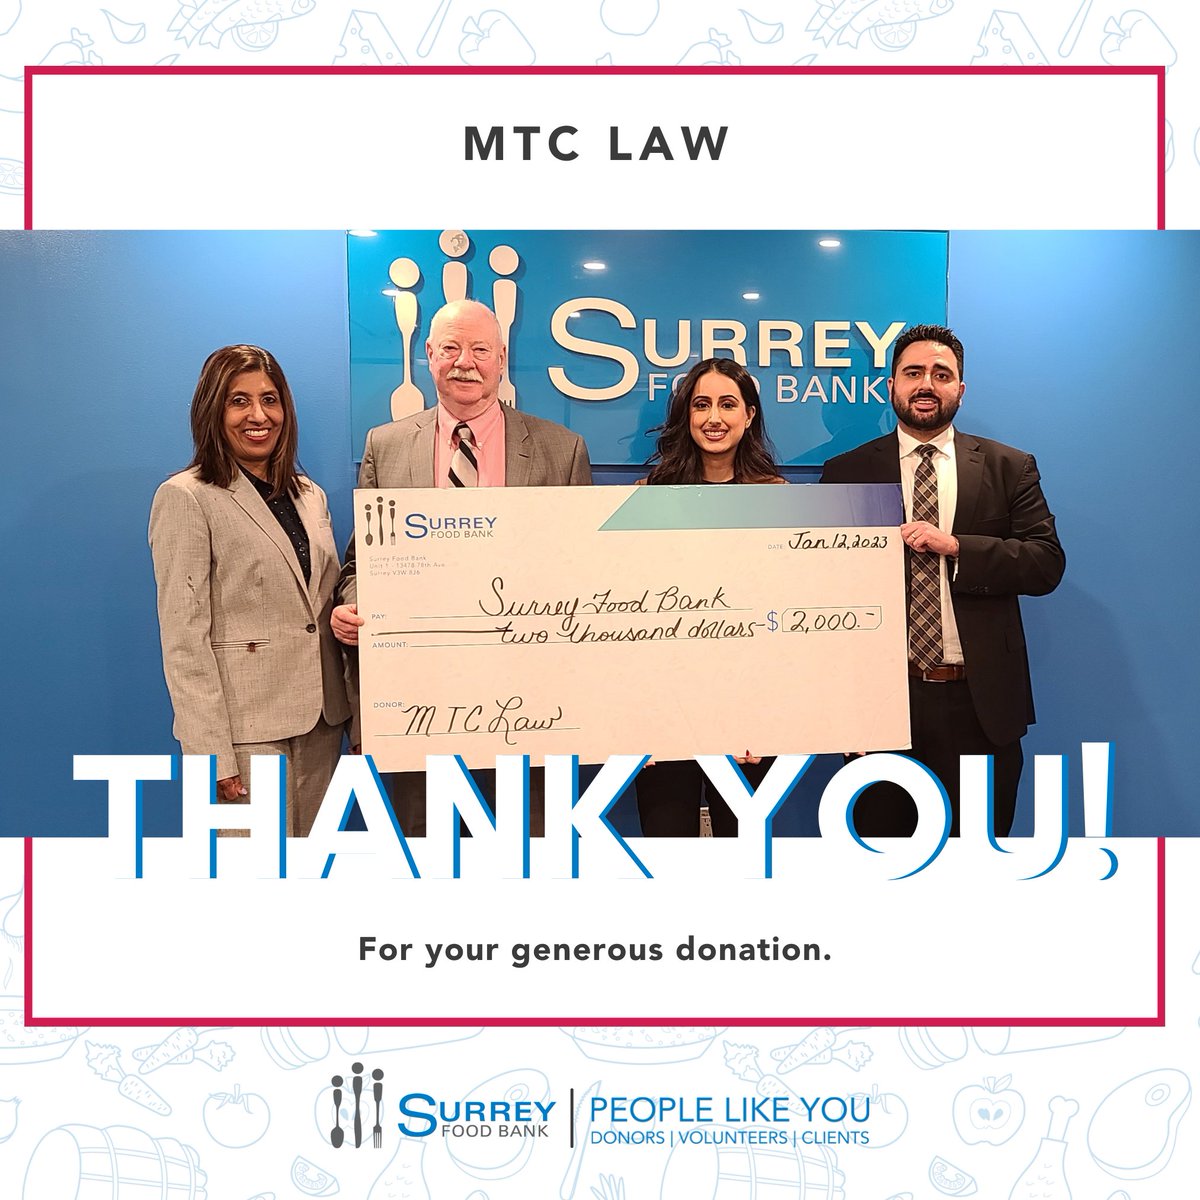 Thank you, MTC Law, for your generous donation to the Surrey Food Bank to help feed the people in our community. MTC Law has been our neighbour for over 30 years & has supported us as our client numbers grew. We appreciate you. #SurreyFoodBank #MTCLAW #CorporateGiving #SurreyBC